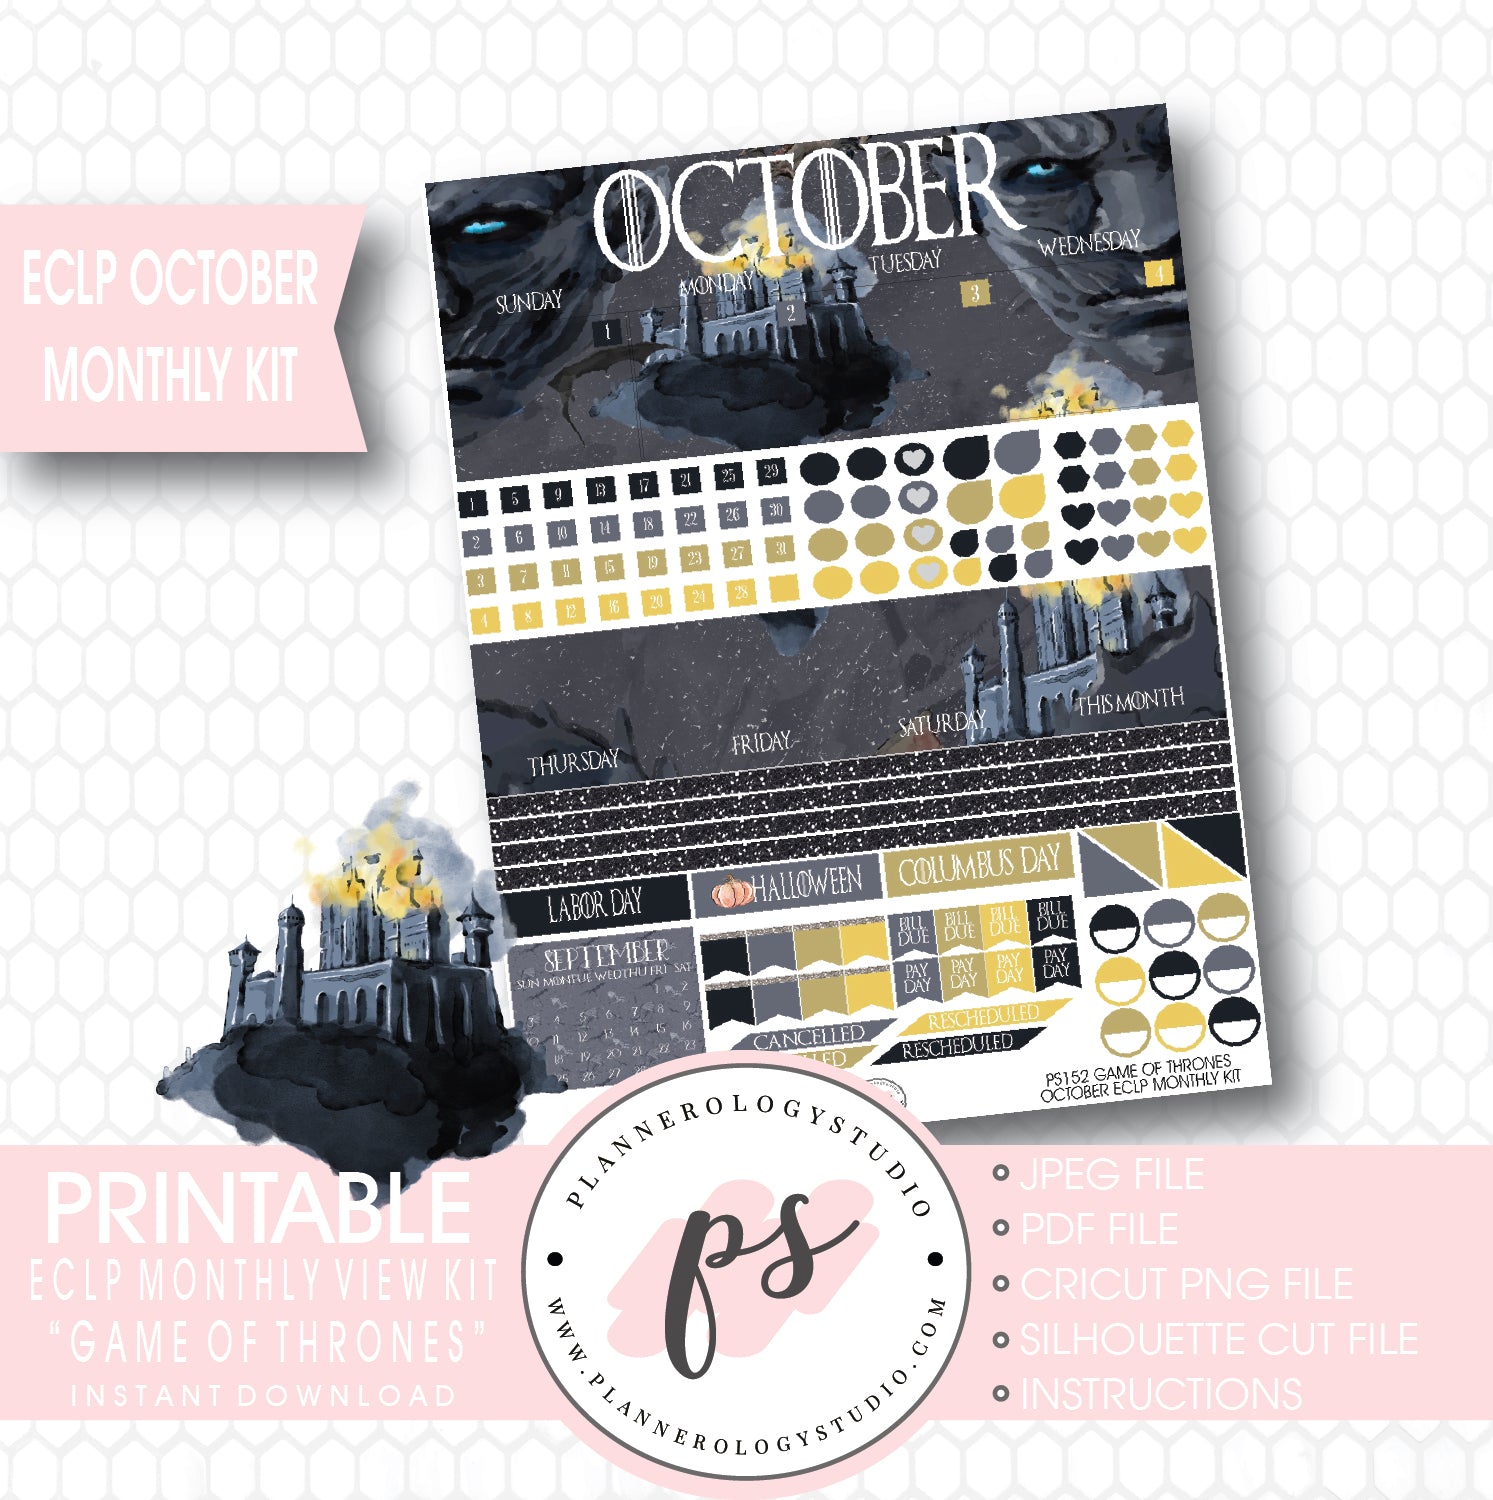 Game of Thrones (GOT) October 2017 Monthly View Kit Printable Planner Stickers (for use with ECLP) - Plannerologystudio